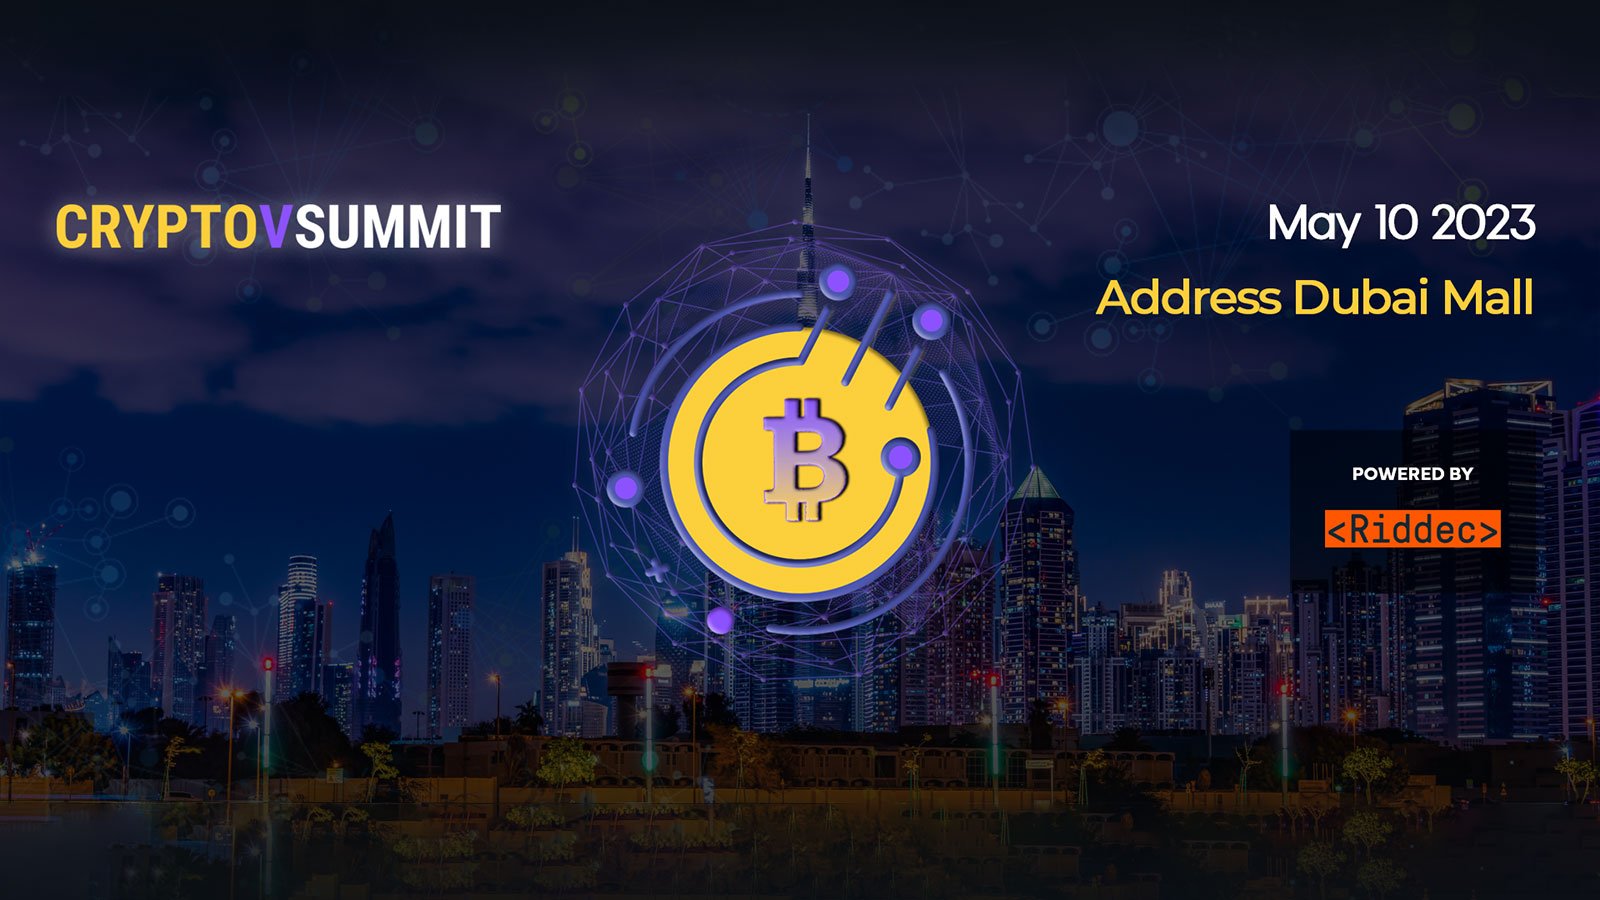 CRYPTOVSUMMIT to Highlight Latest Developments in Cryptocurrency Industry in Dubai